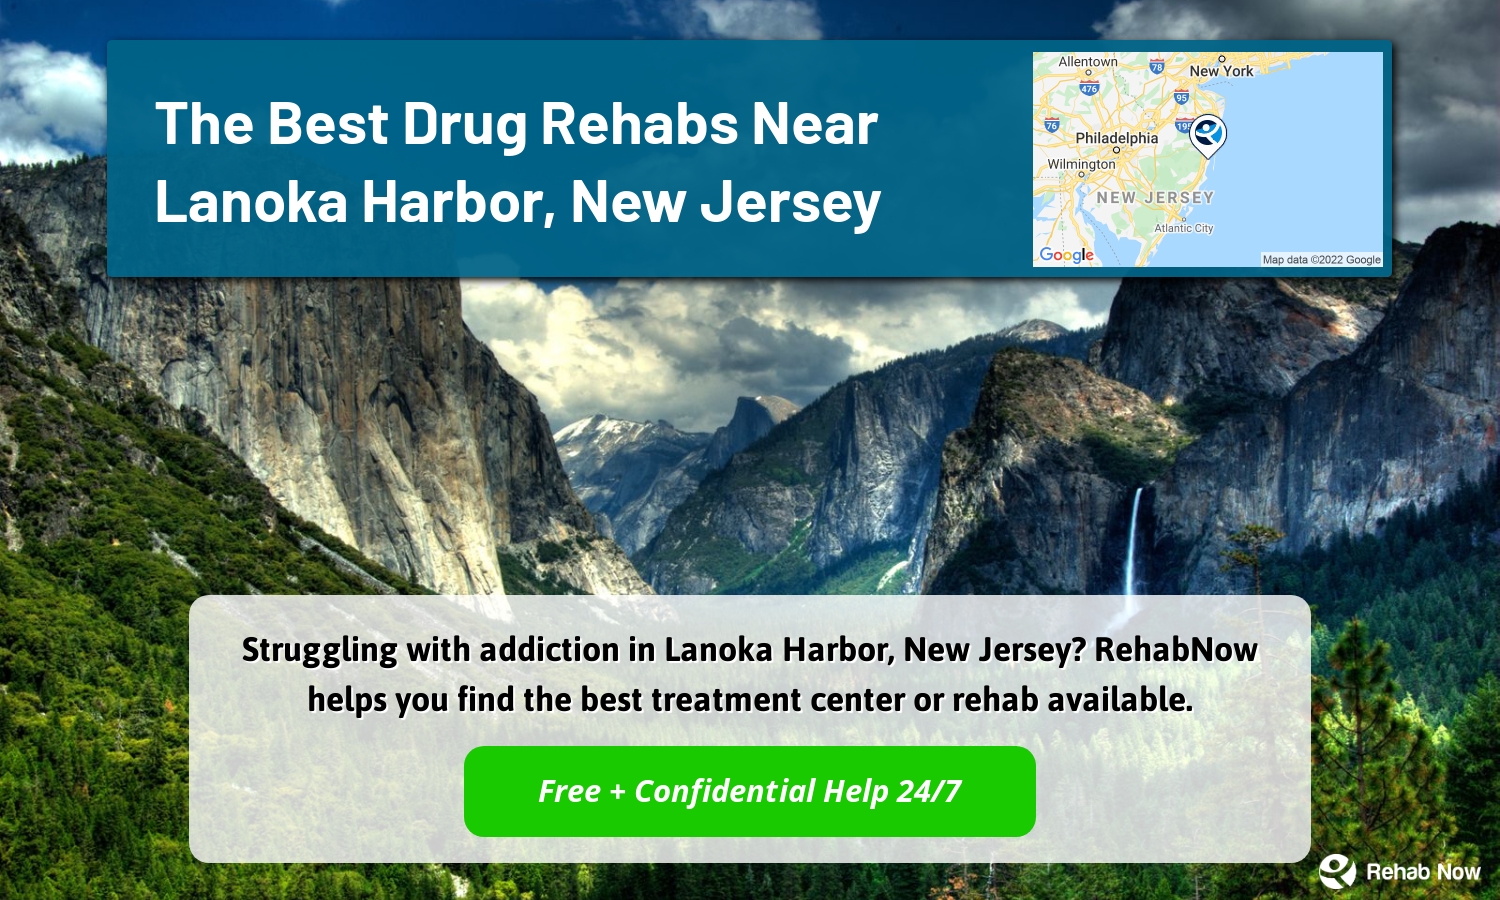 Struggling with addiction in Lanoka Harbor, New Jersey? RehabNow helps you find the best treatment center or rehab available.